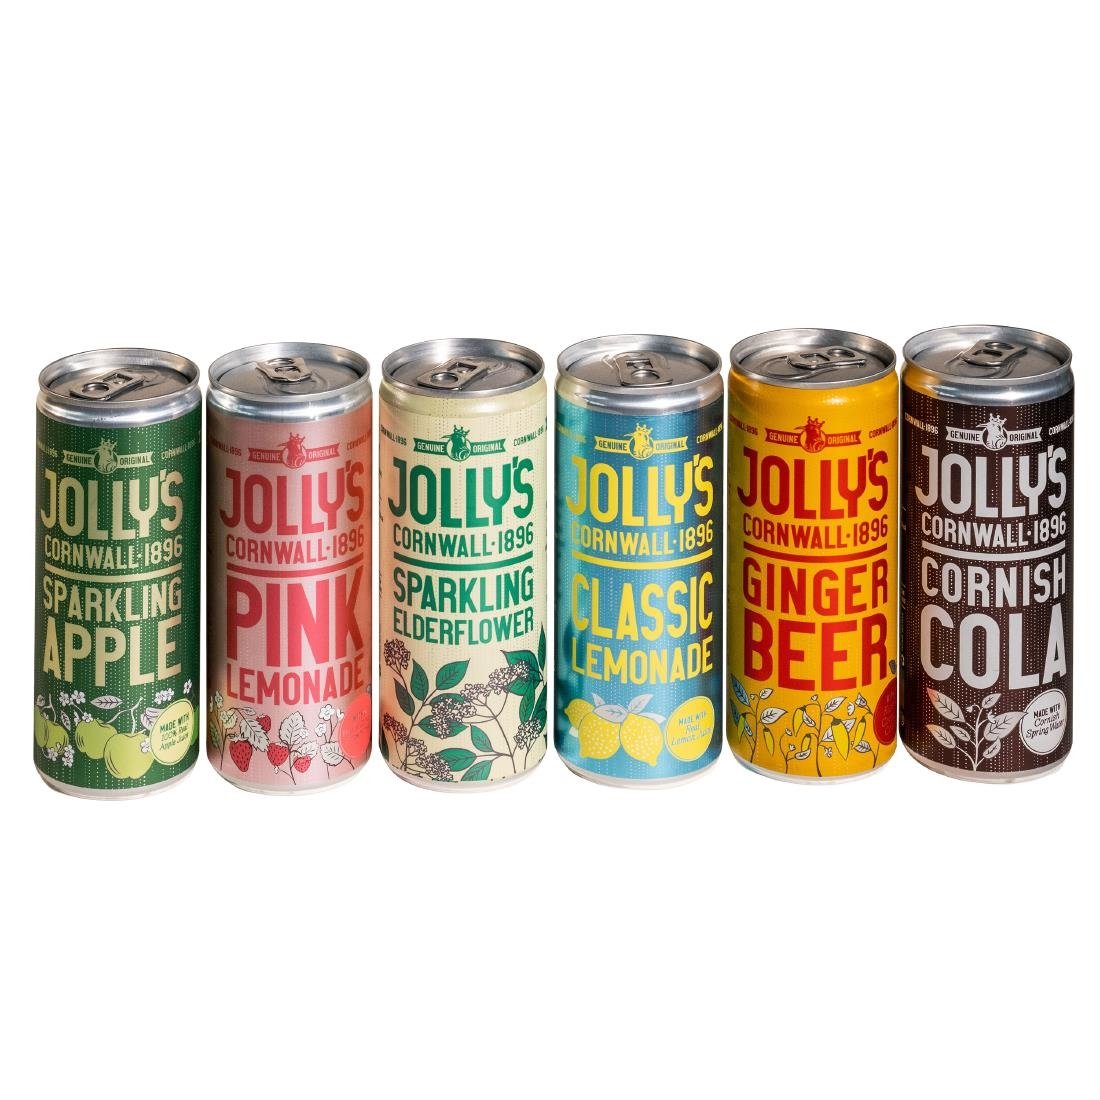 HN944 Jolly's Cornish Cola Cans 250ml (Pack of 24)